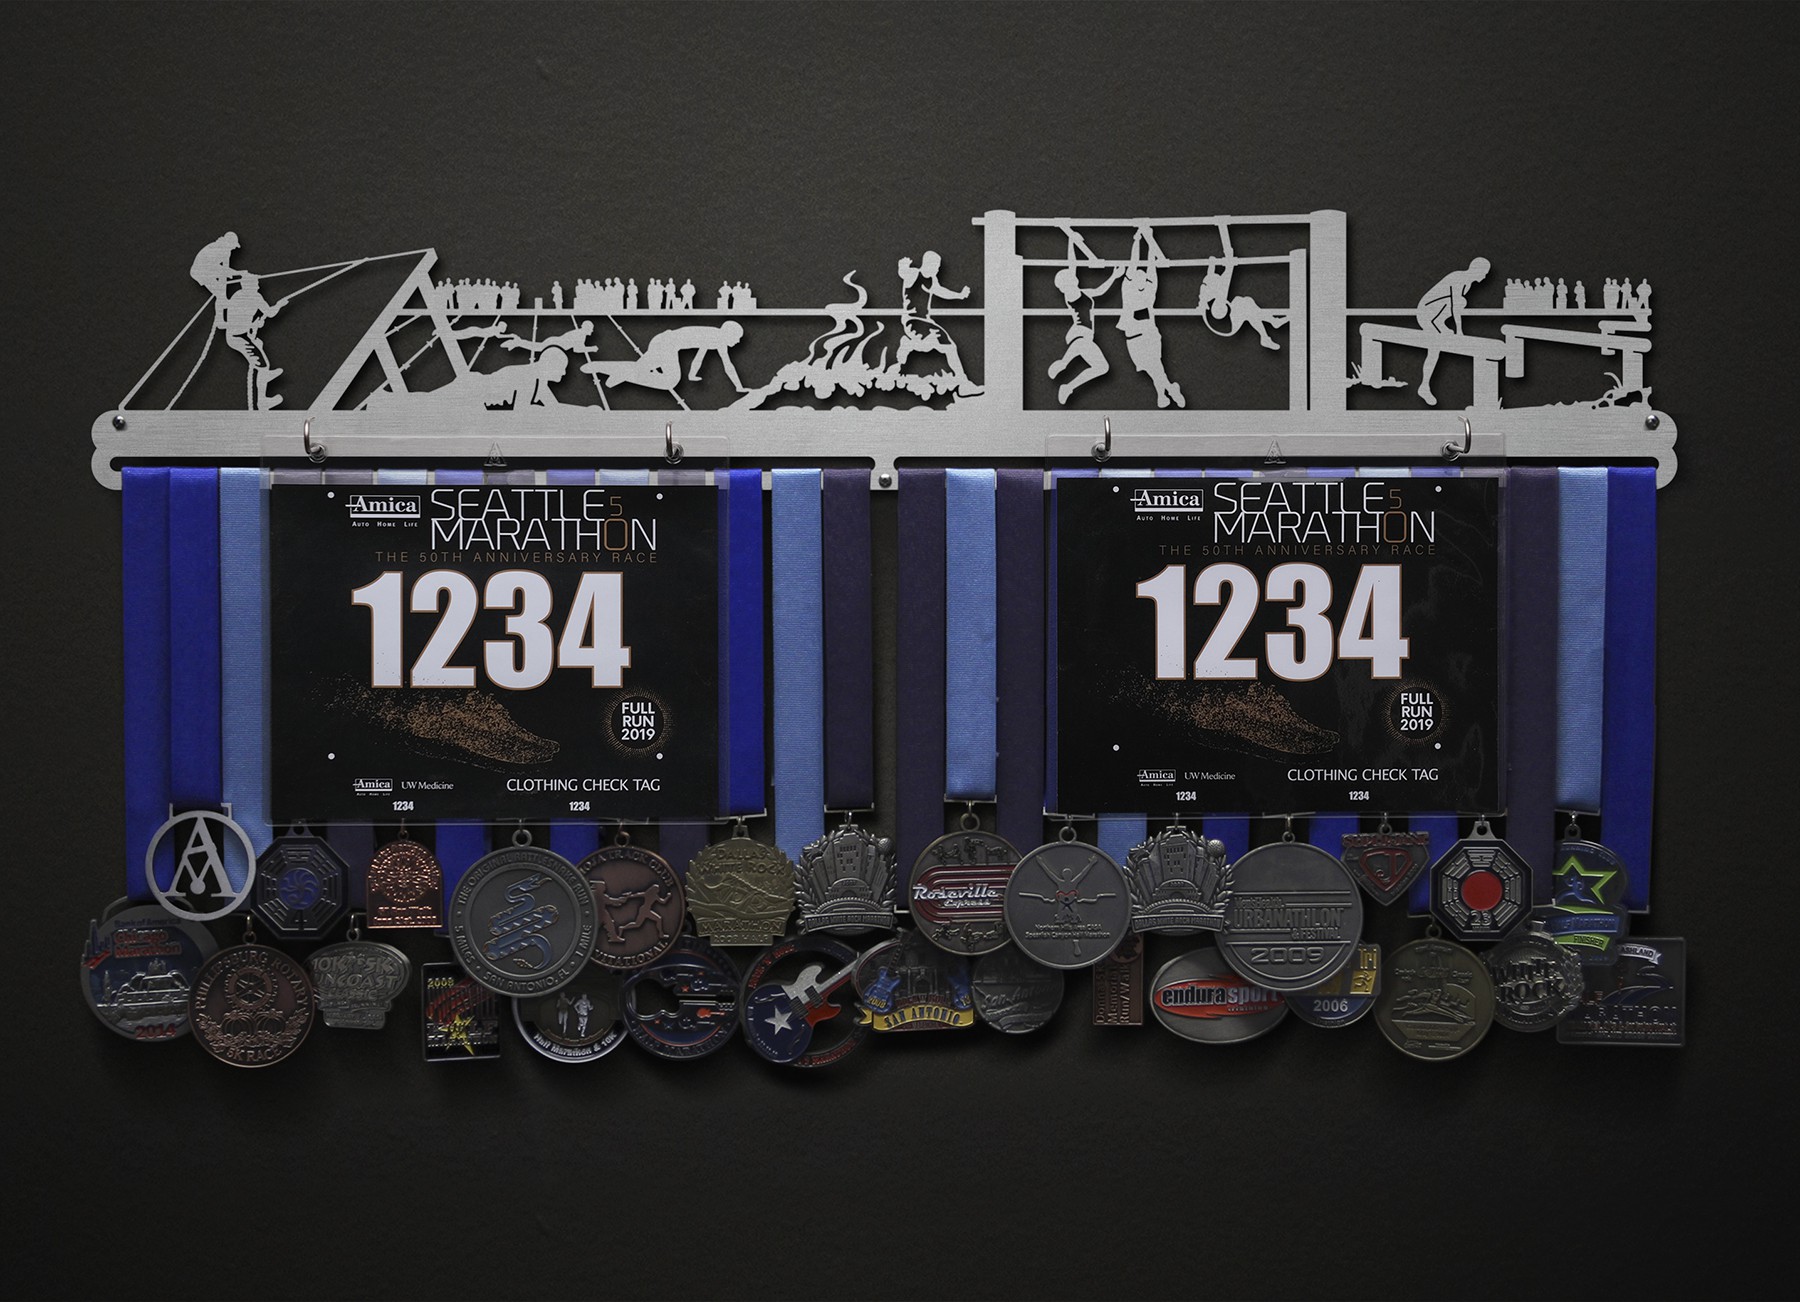 Obstacle Course Bib and Medal Display